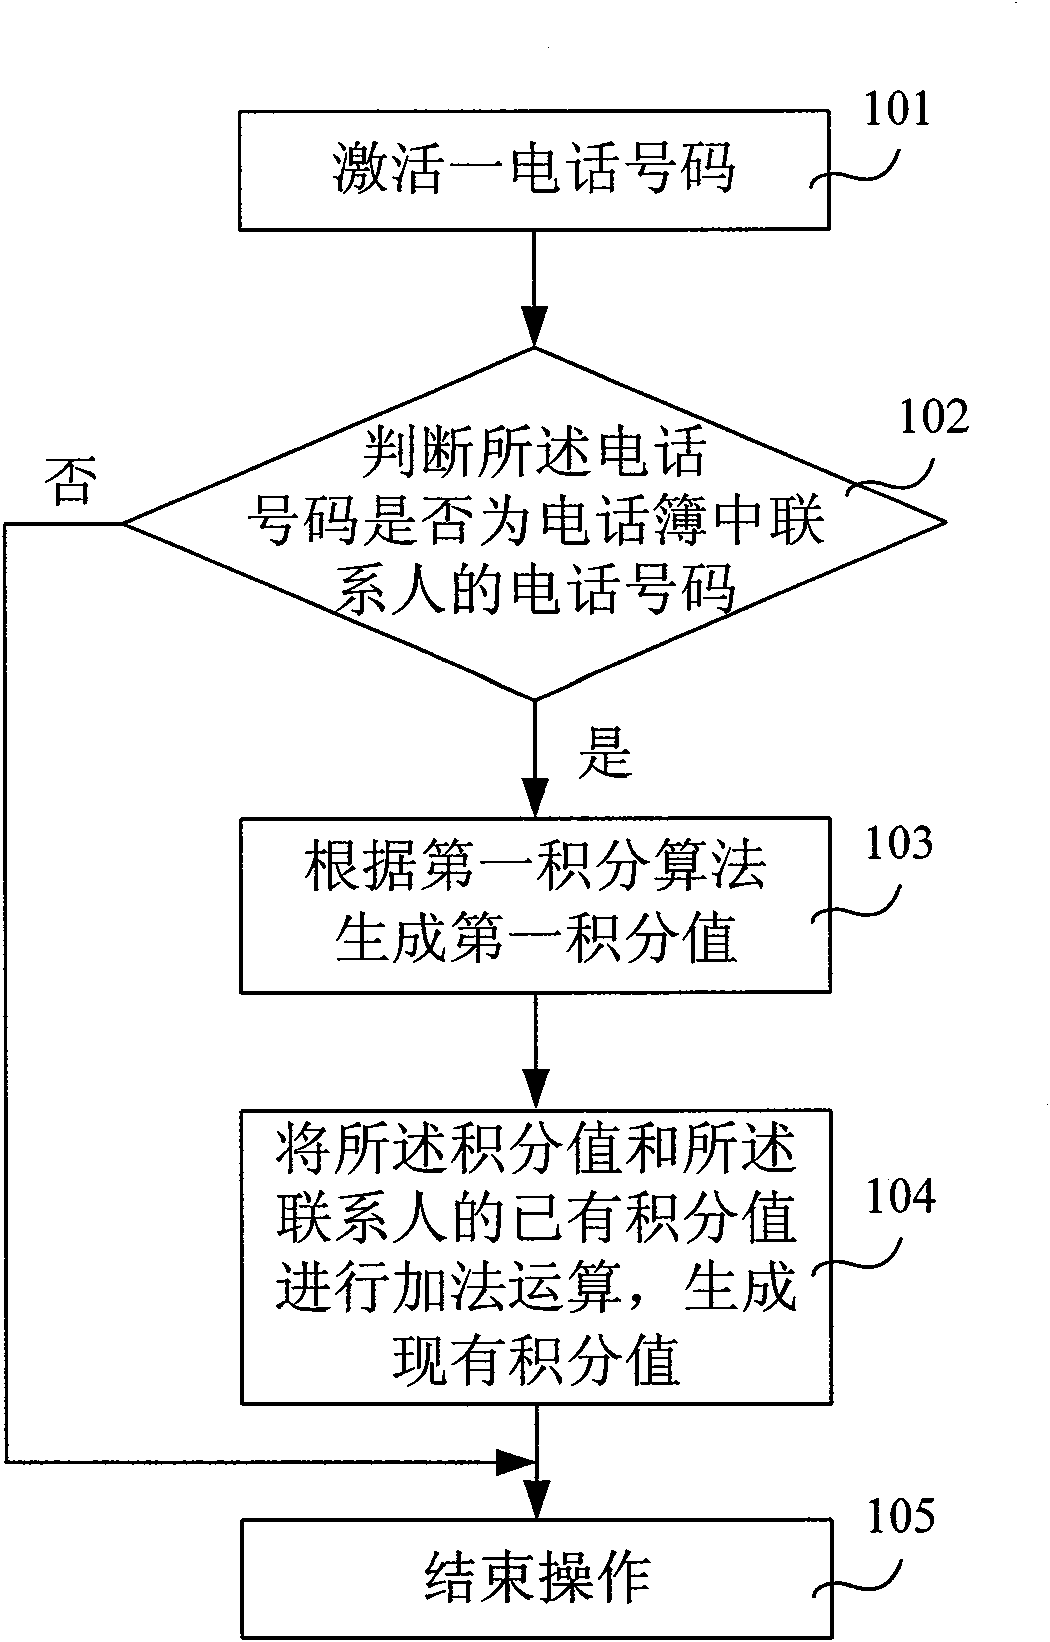 Method and device for managing telephone directory